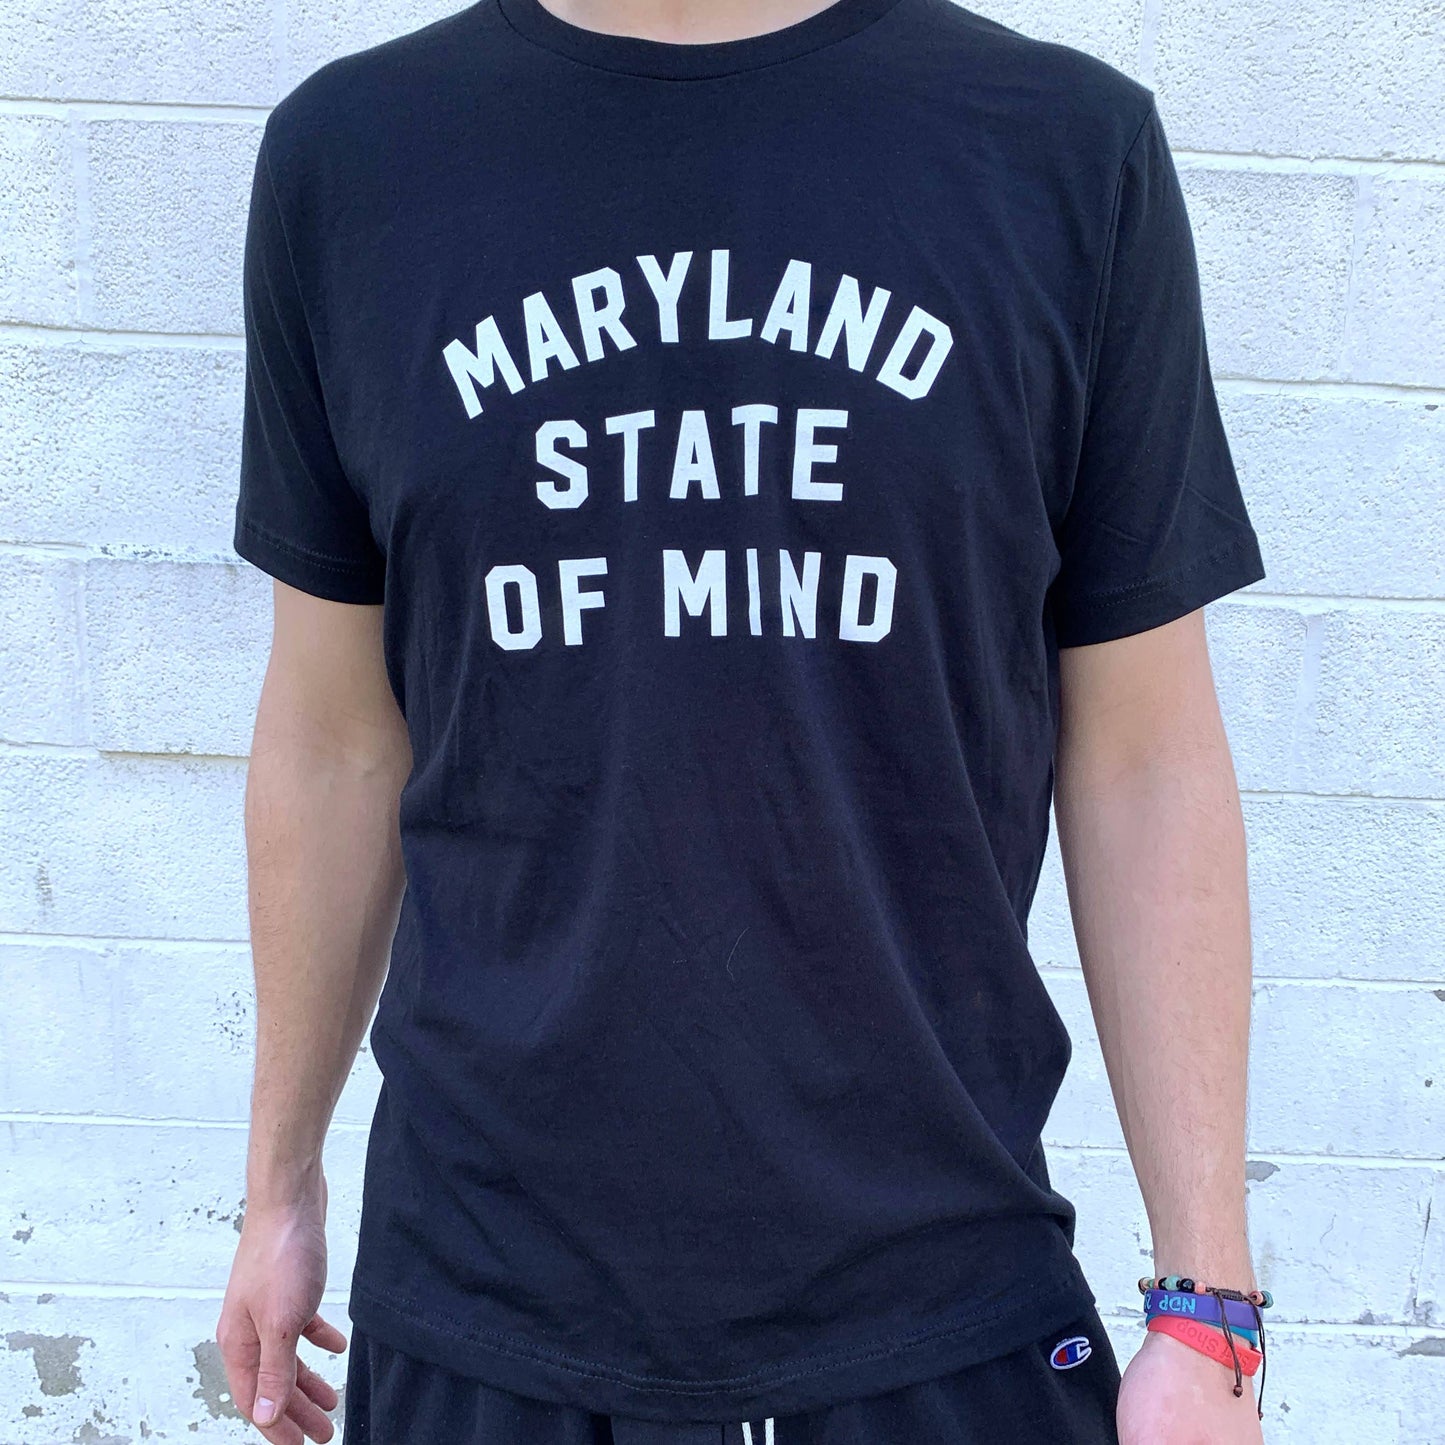 Maryland State of Mind / Shirt - Route One Apparel